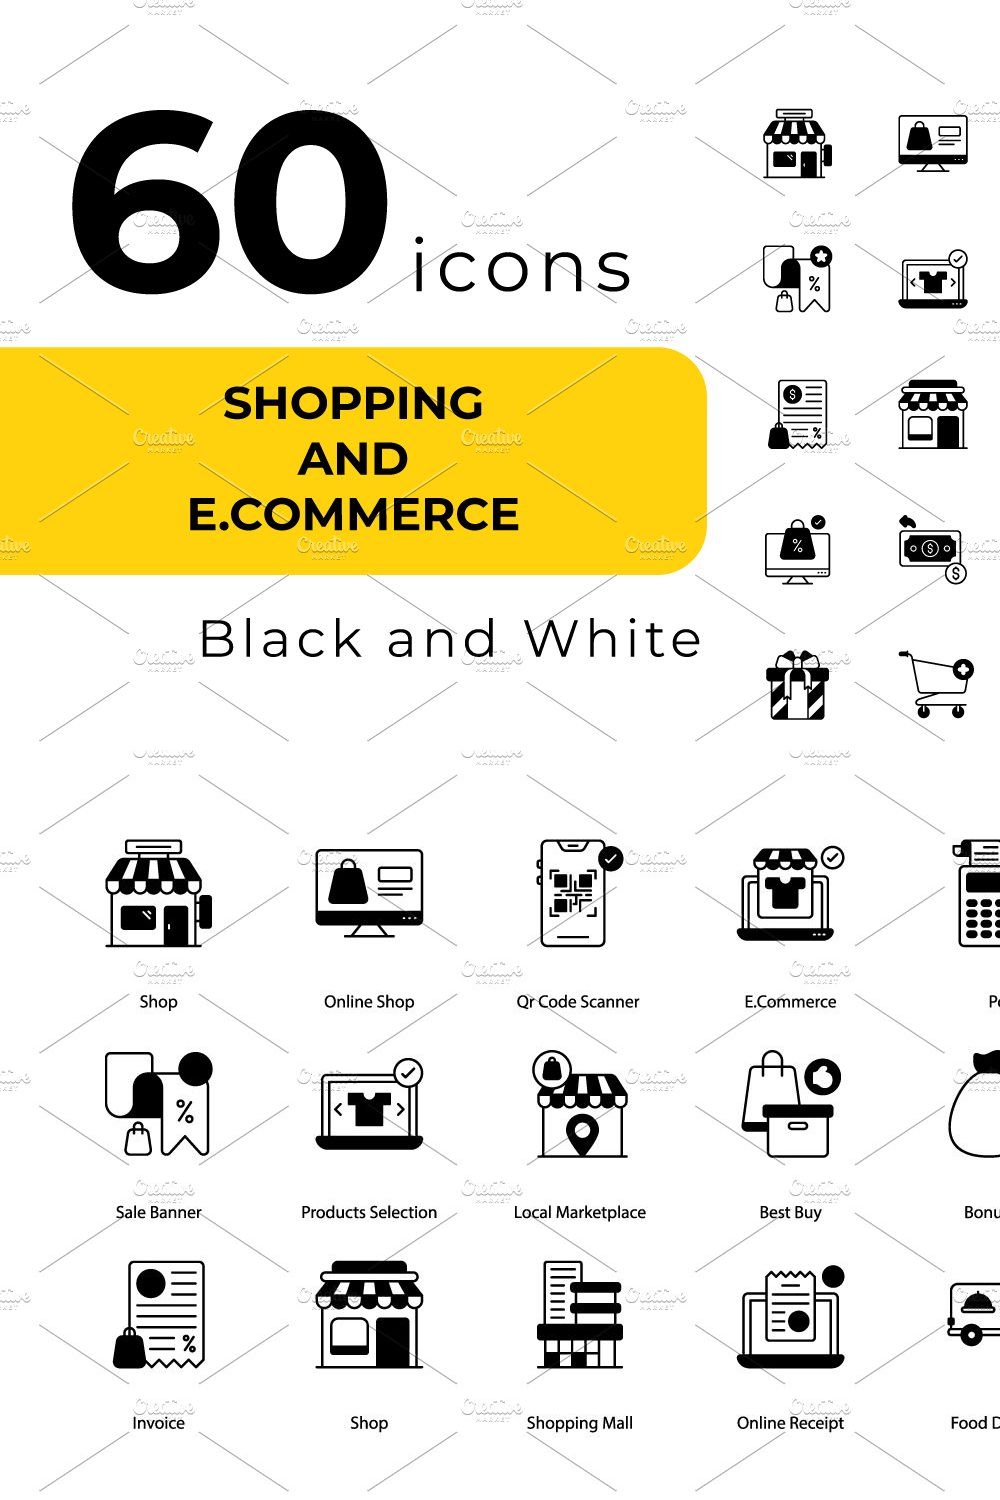 Shopping and E-Commerce icons pinterest preview image.